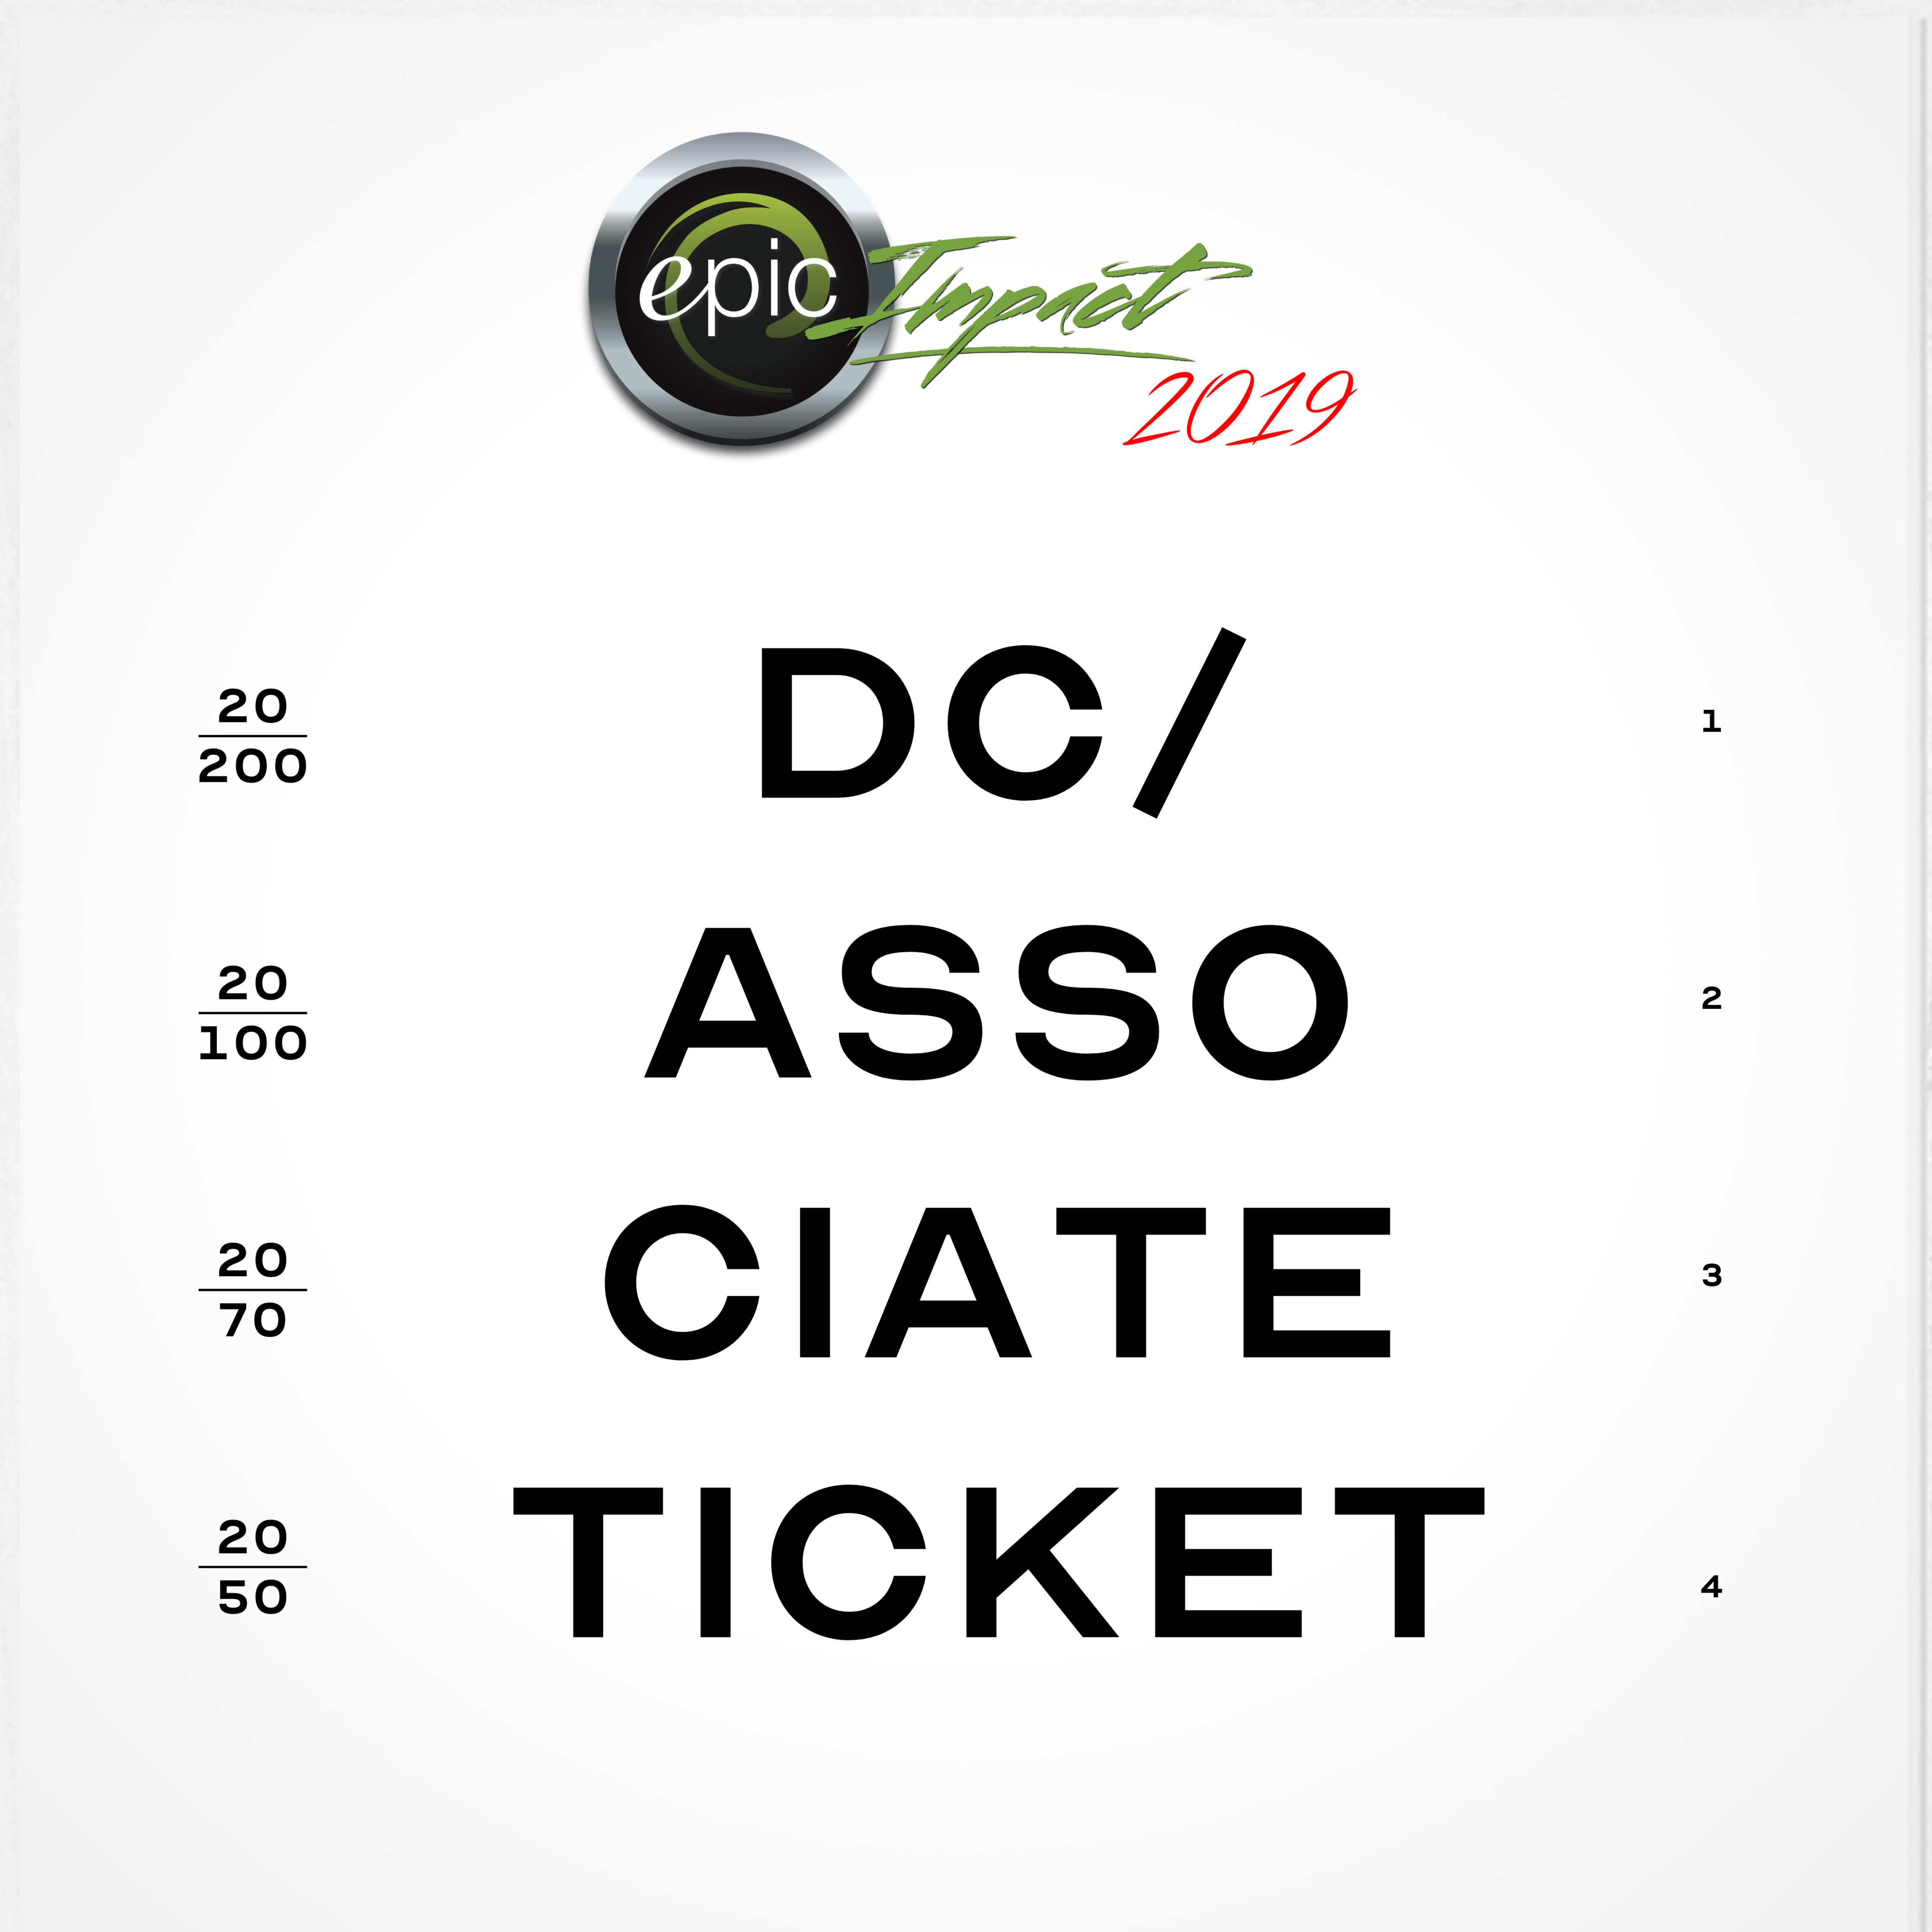 Additional Impact 2019 DC Ticket